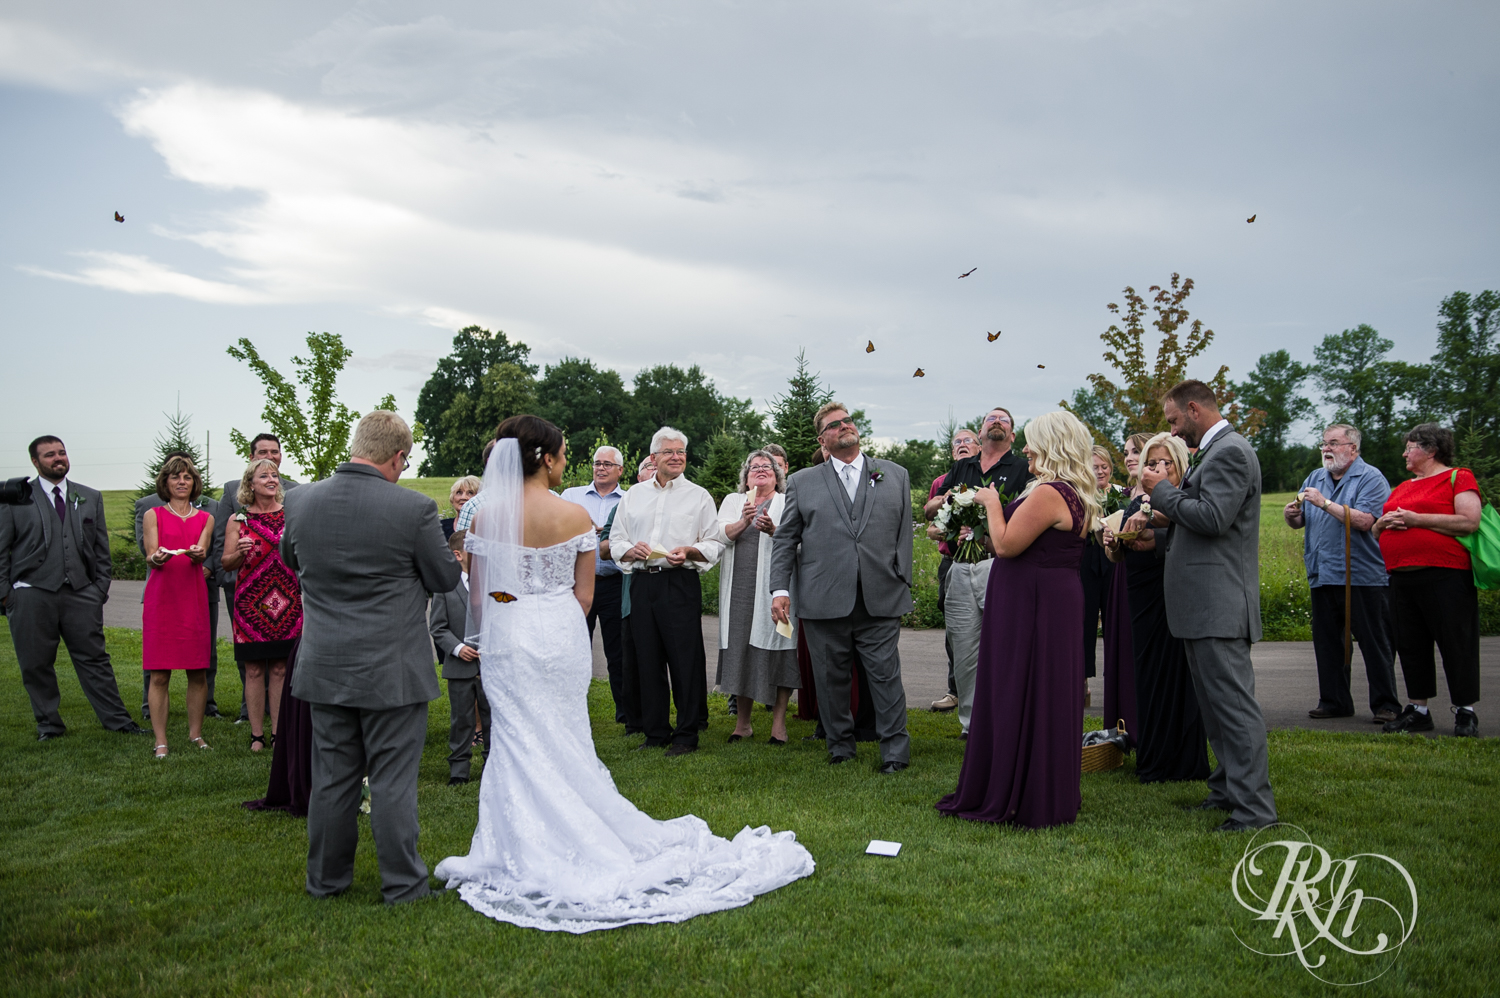 Bride and groom release butterflies at Creekside Farm Weddings and Events in Rush City, Minnesota.